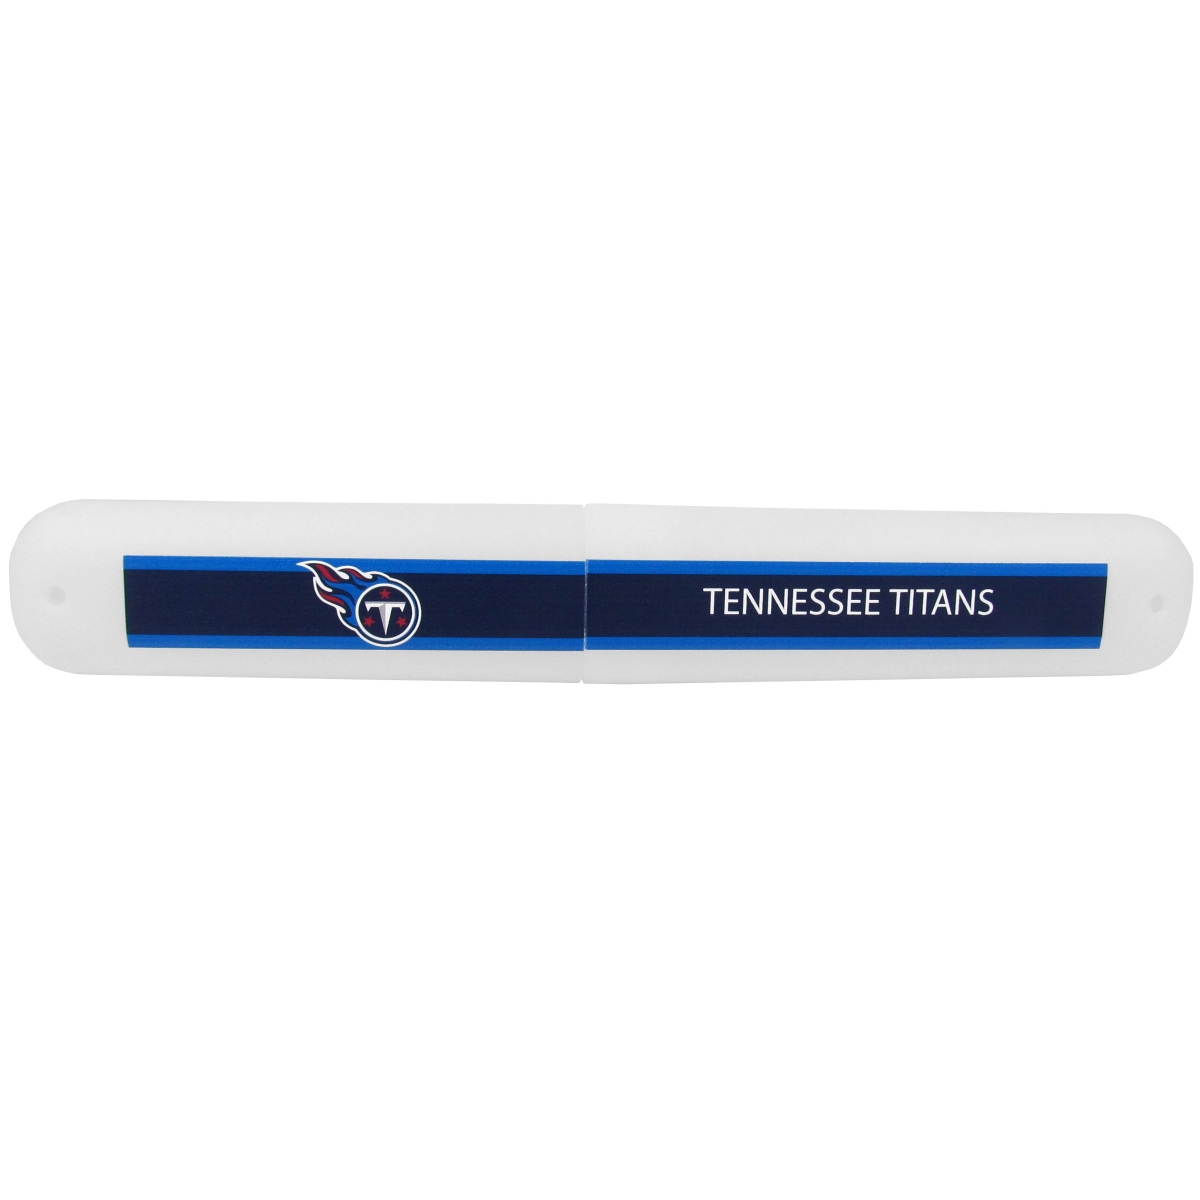 Picture of Siskiyou FTBC185 Unisex NFL Tennessee Titans Travel Toothbrush Case - One Size